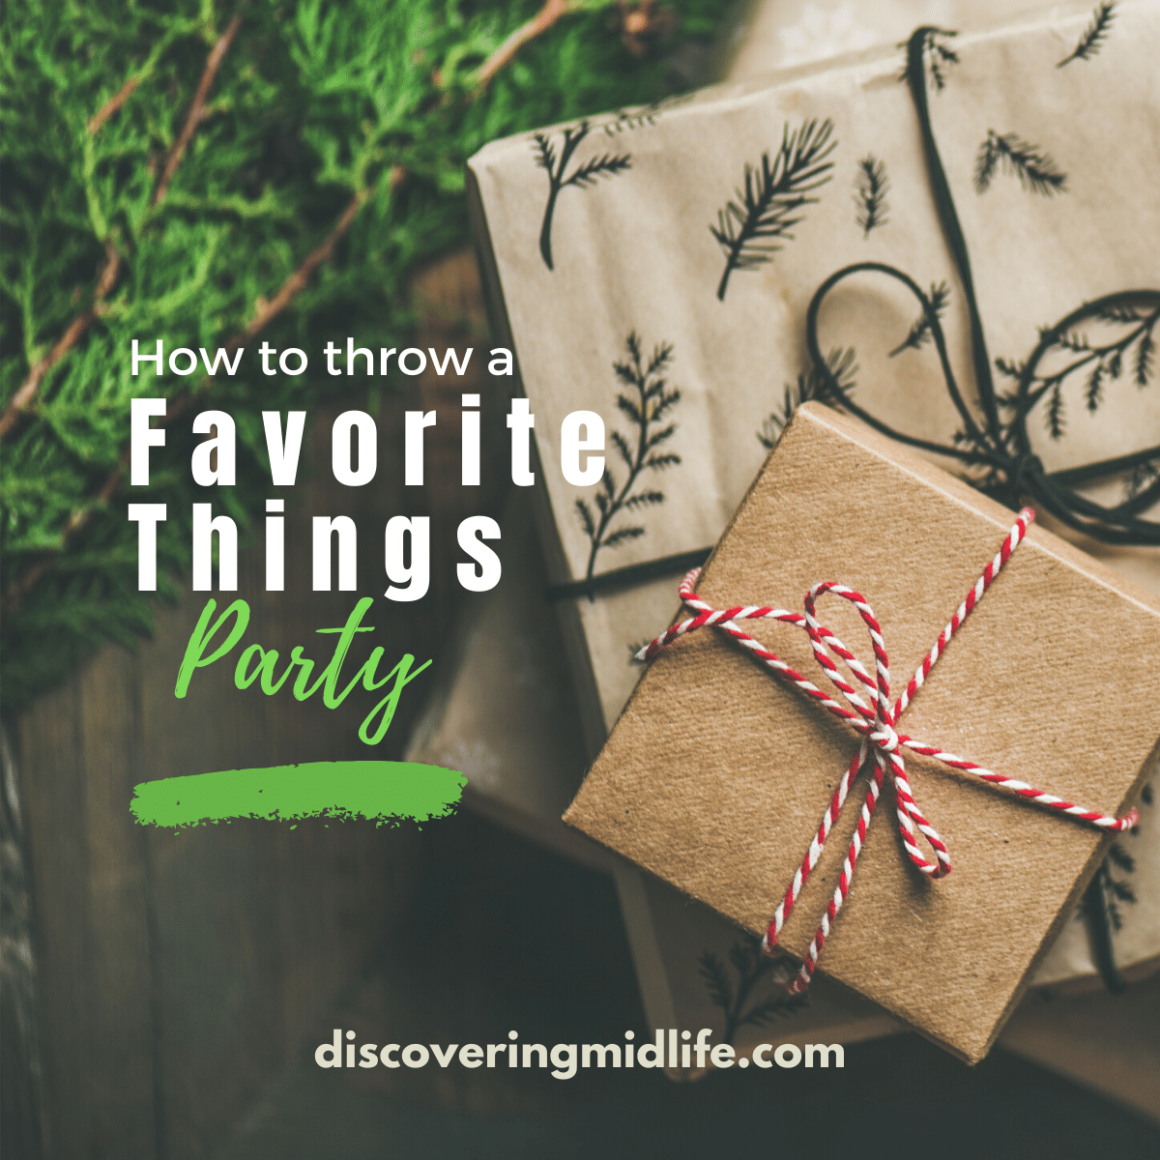 How to throw a Favorite Things Party